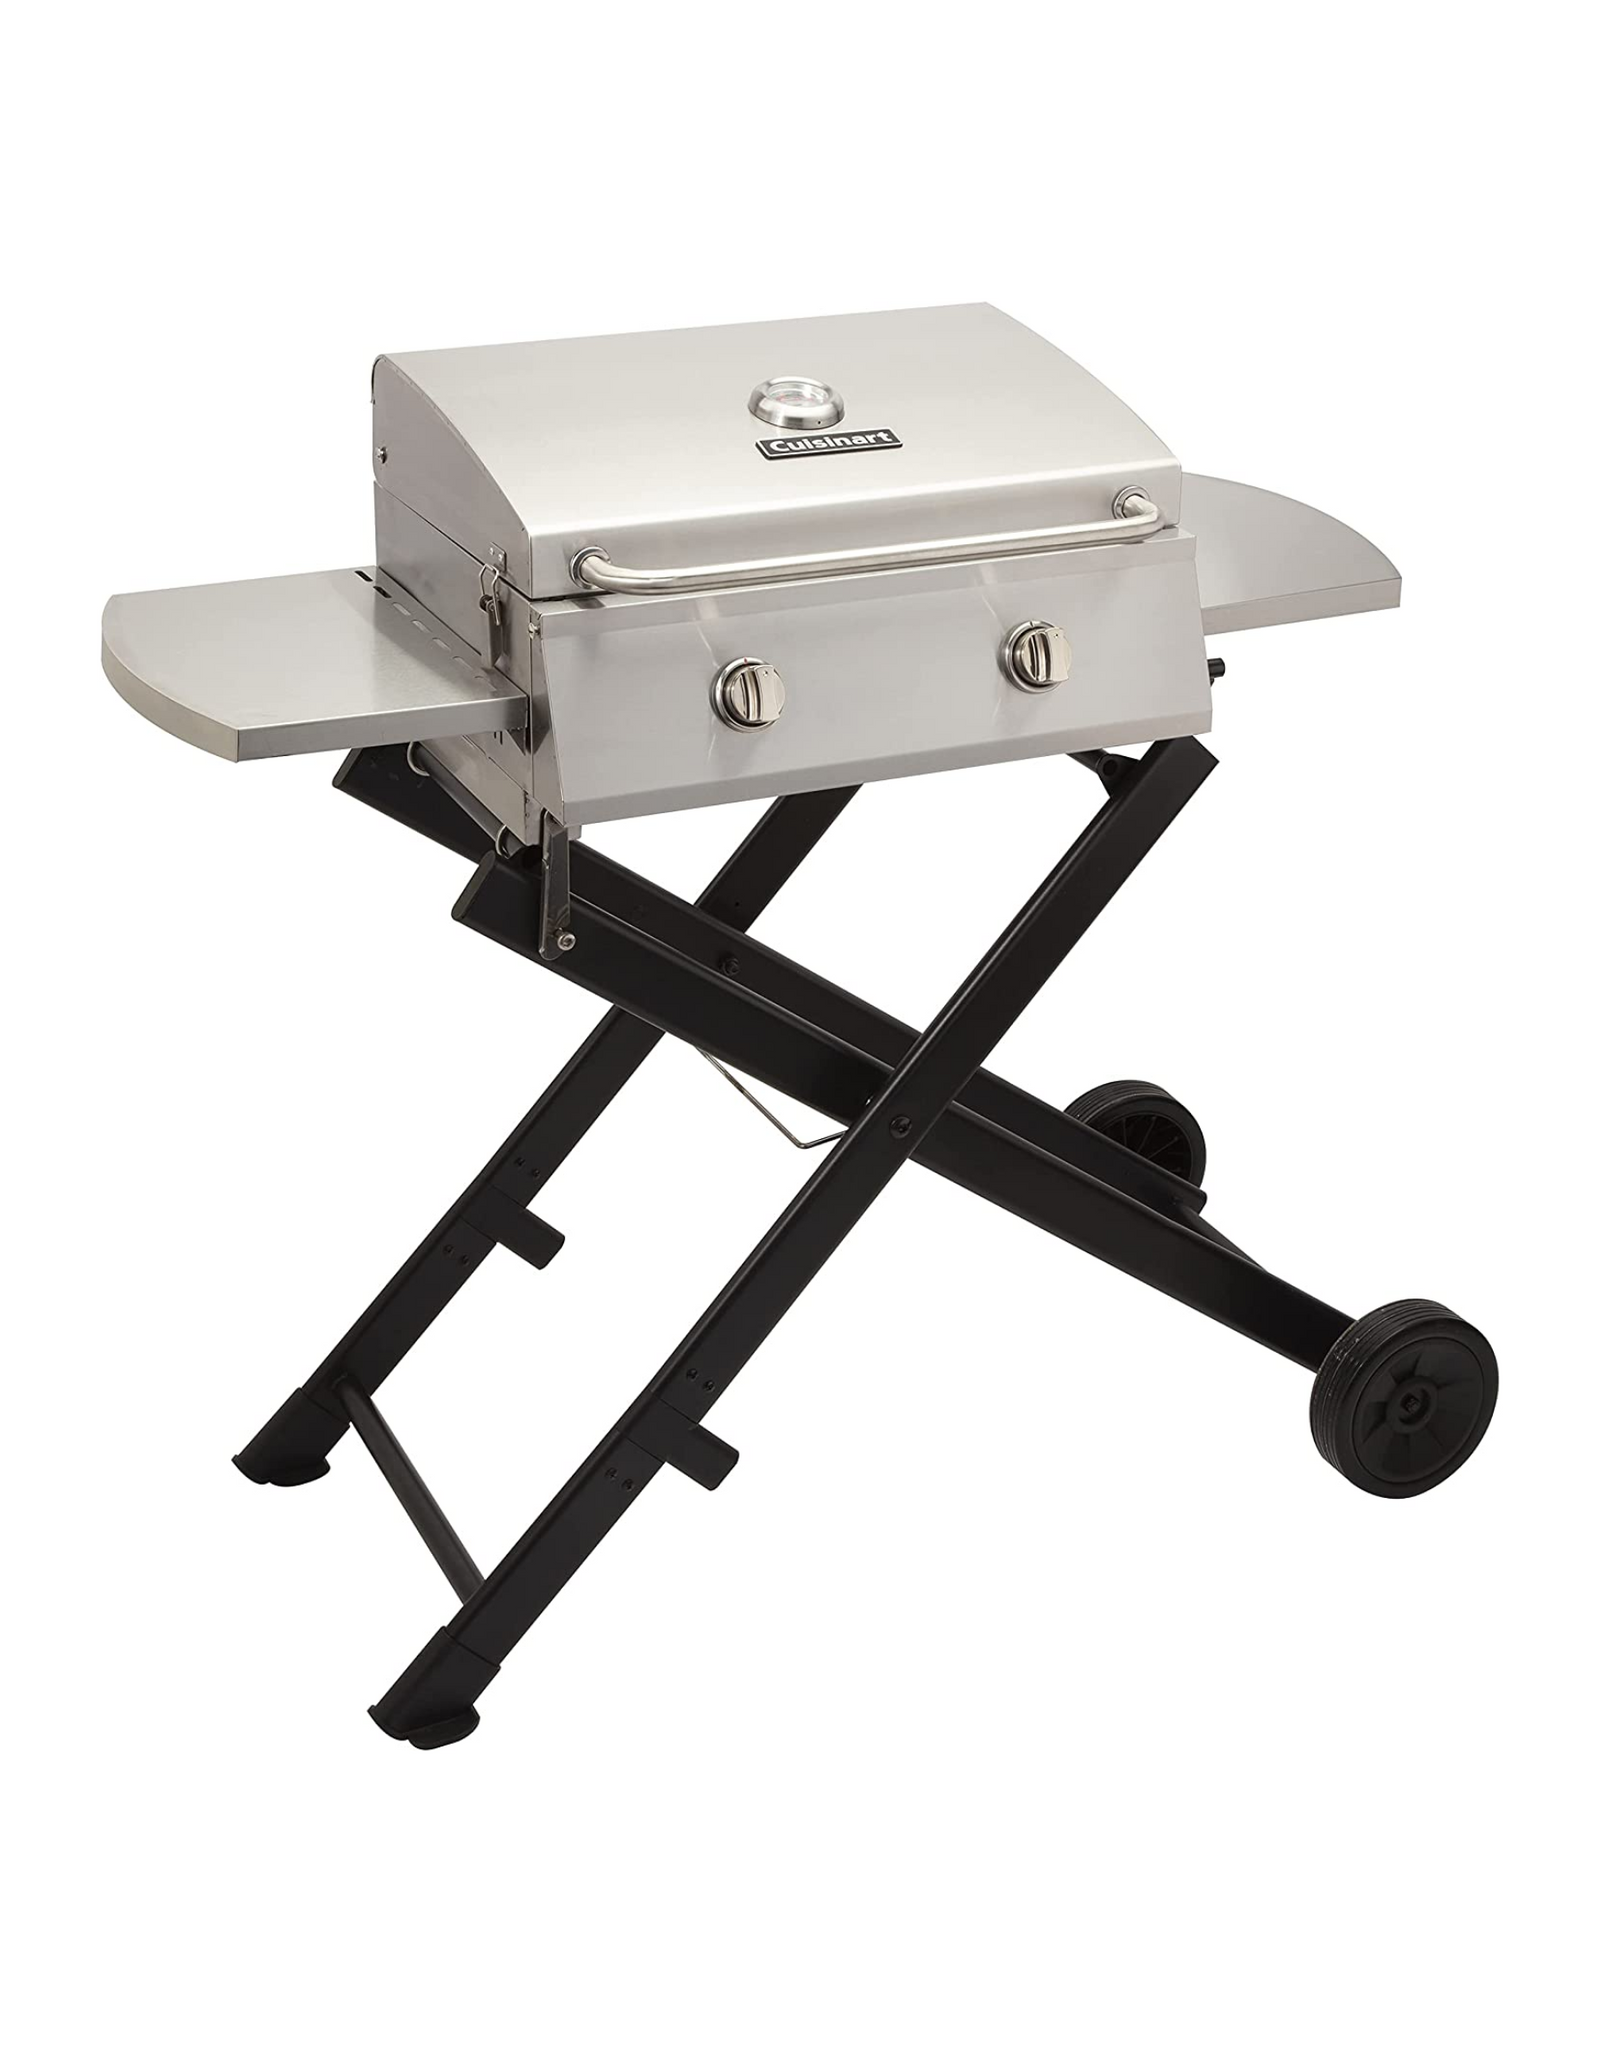 Cuisinart CGG-340 Chef's Style Roll-Away Portable Gas Grill, Stainless Steel